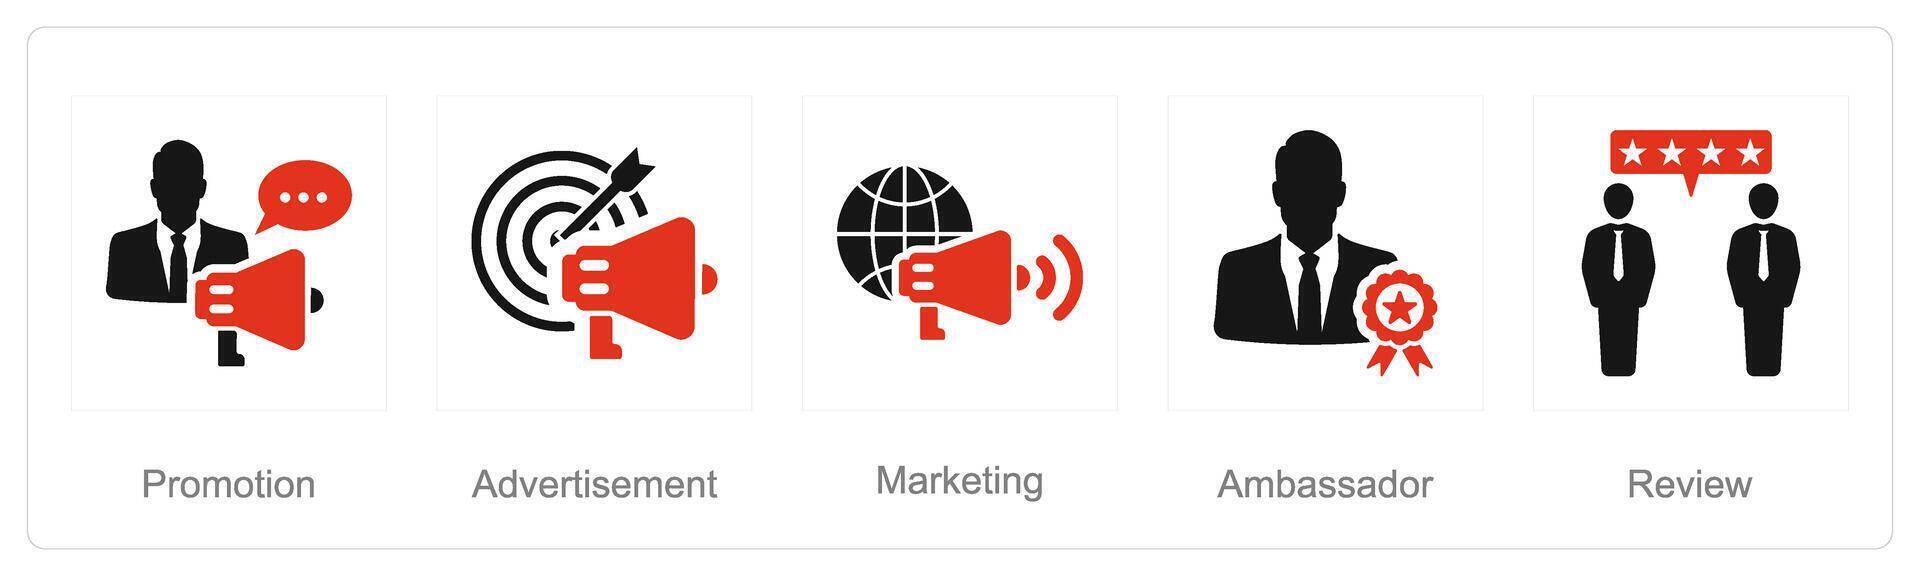 A set of 5 Influencer icons as promotion, advertisement, marketing vector